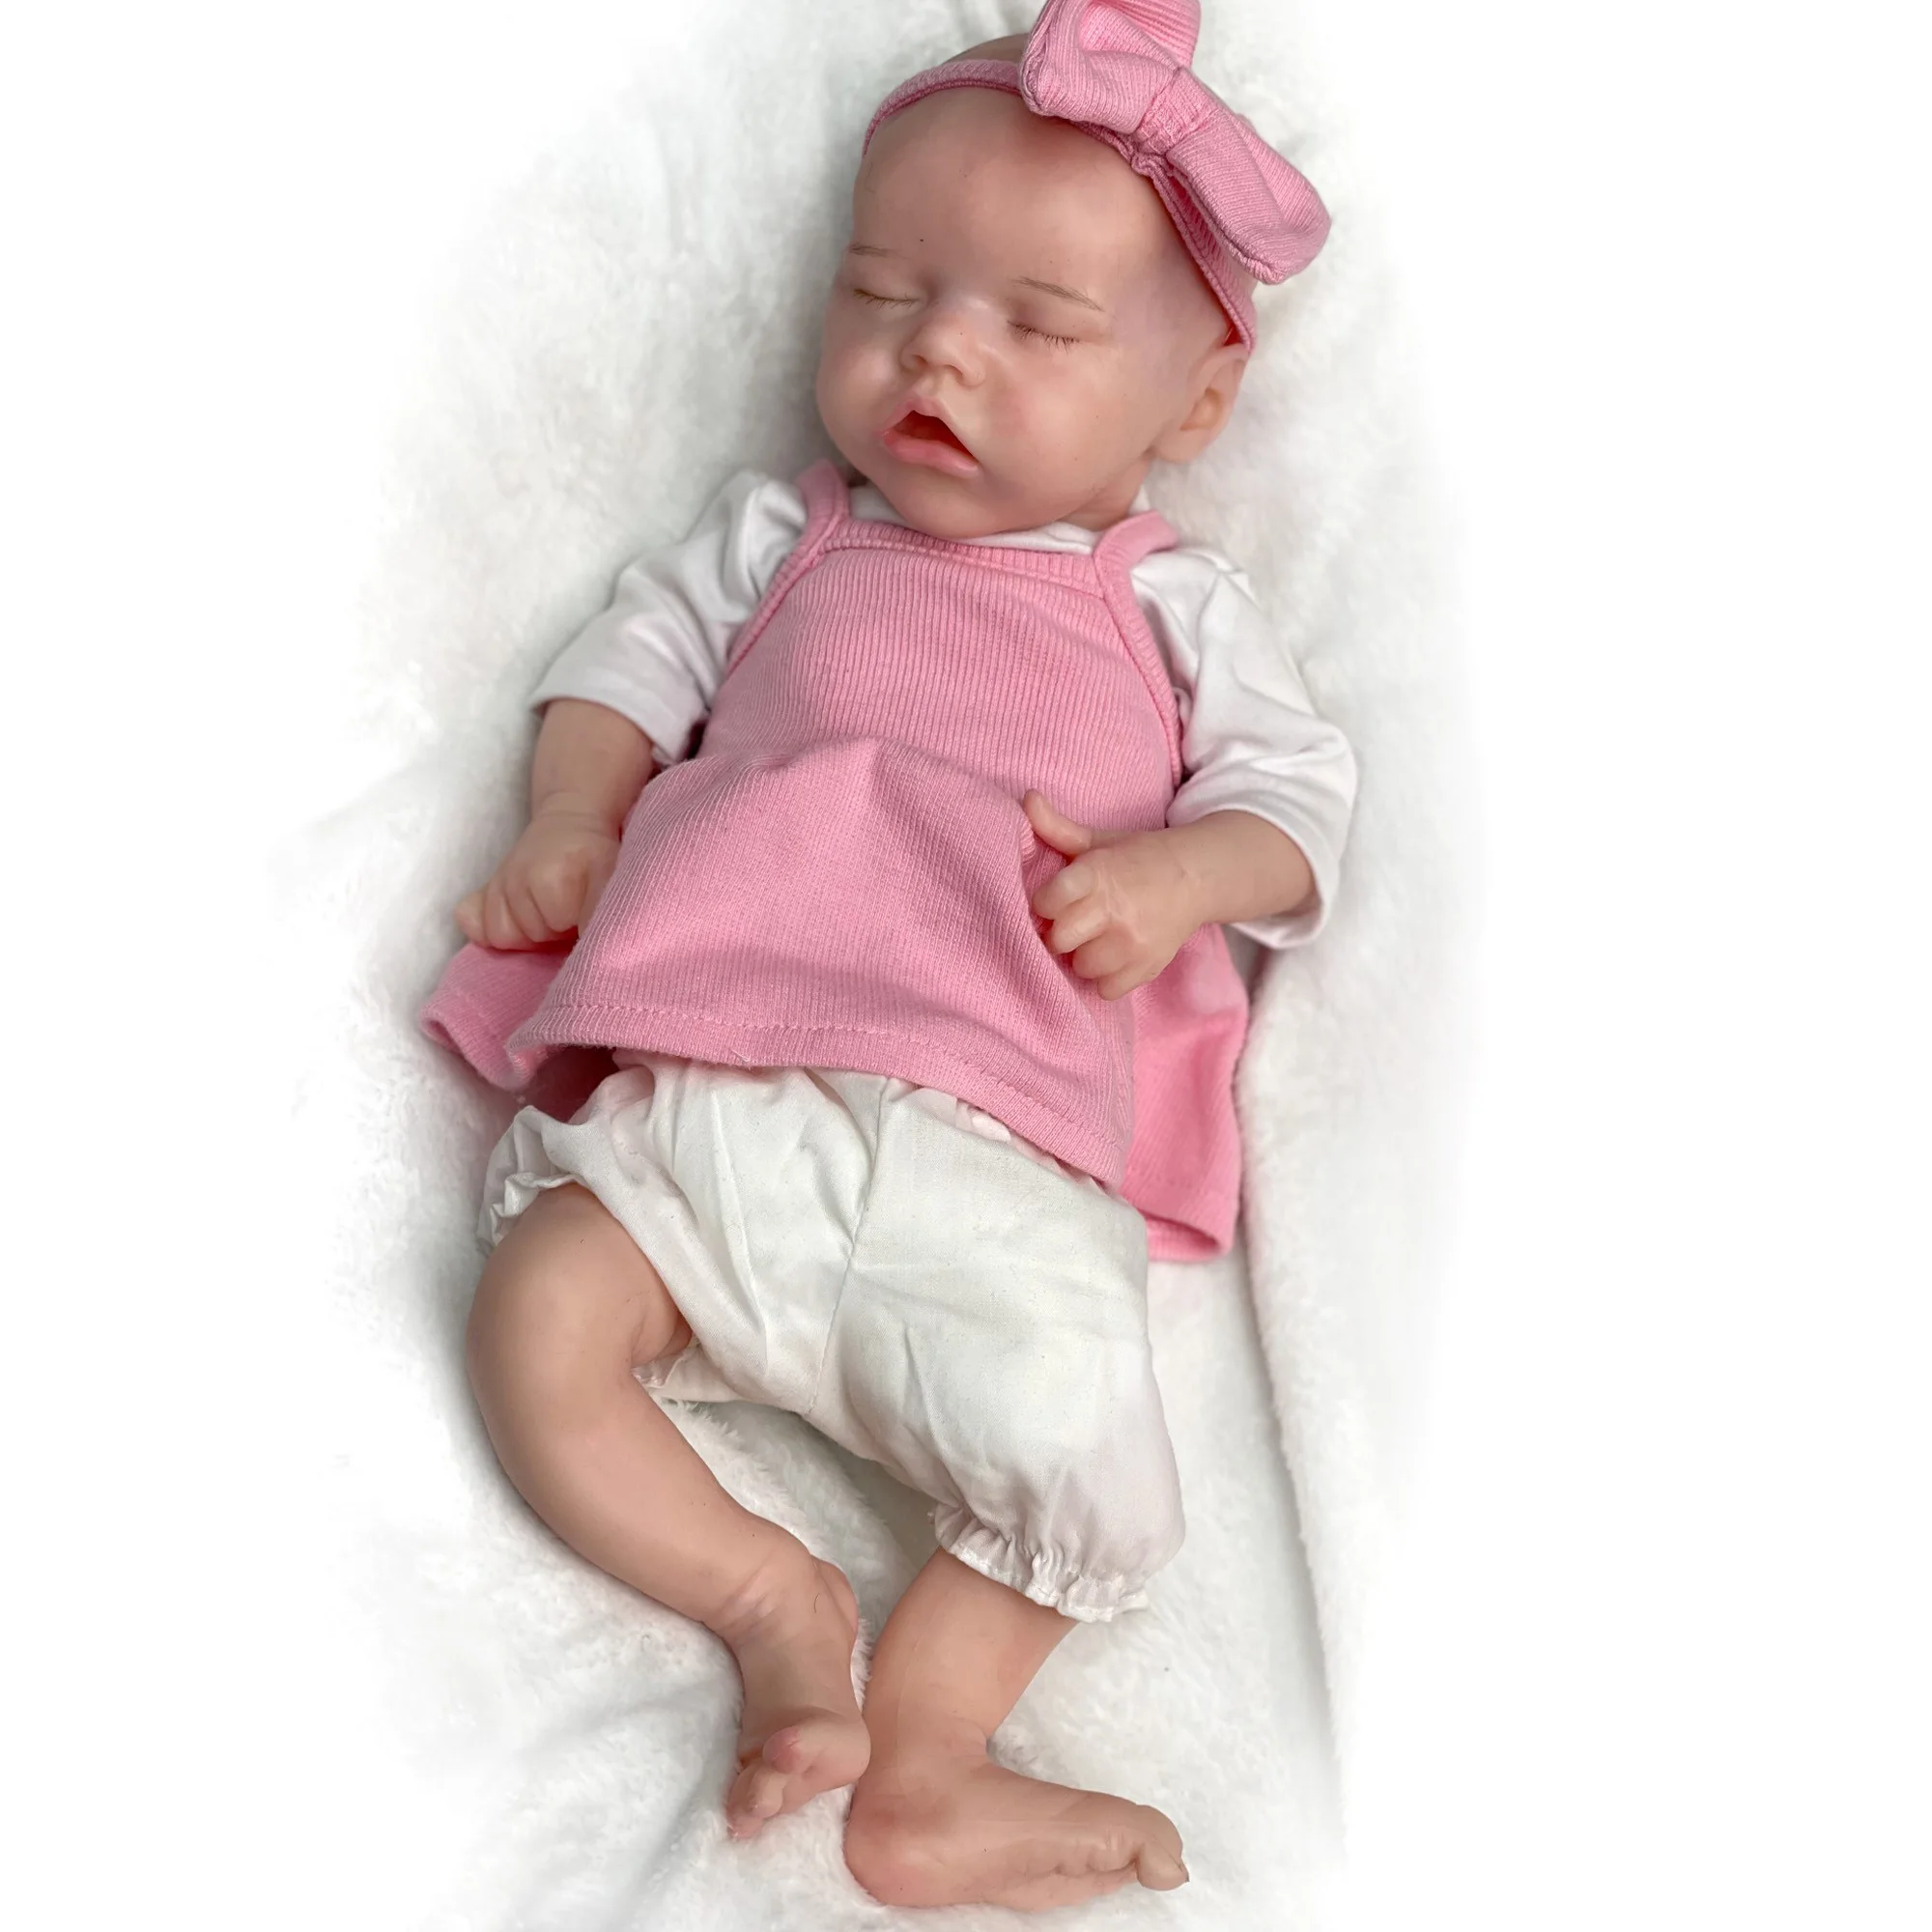 

Painted Twins Girl 18" Reborn Dolls Full Solid Silicone Finished Realistic Sleeping Baby Doll Boneca Reborn Corpo De Silicone